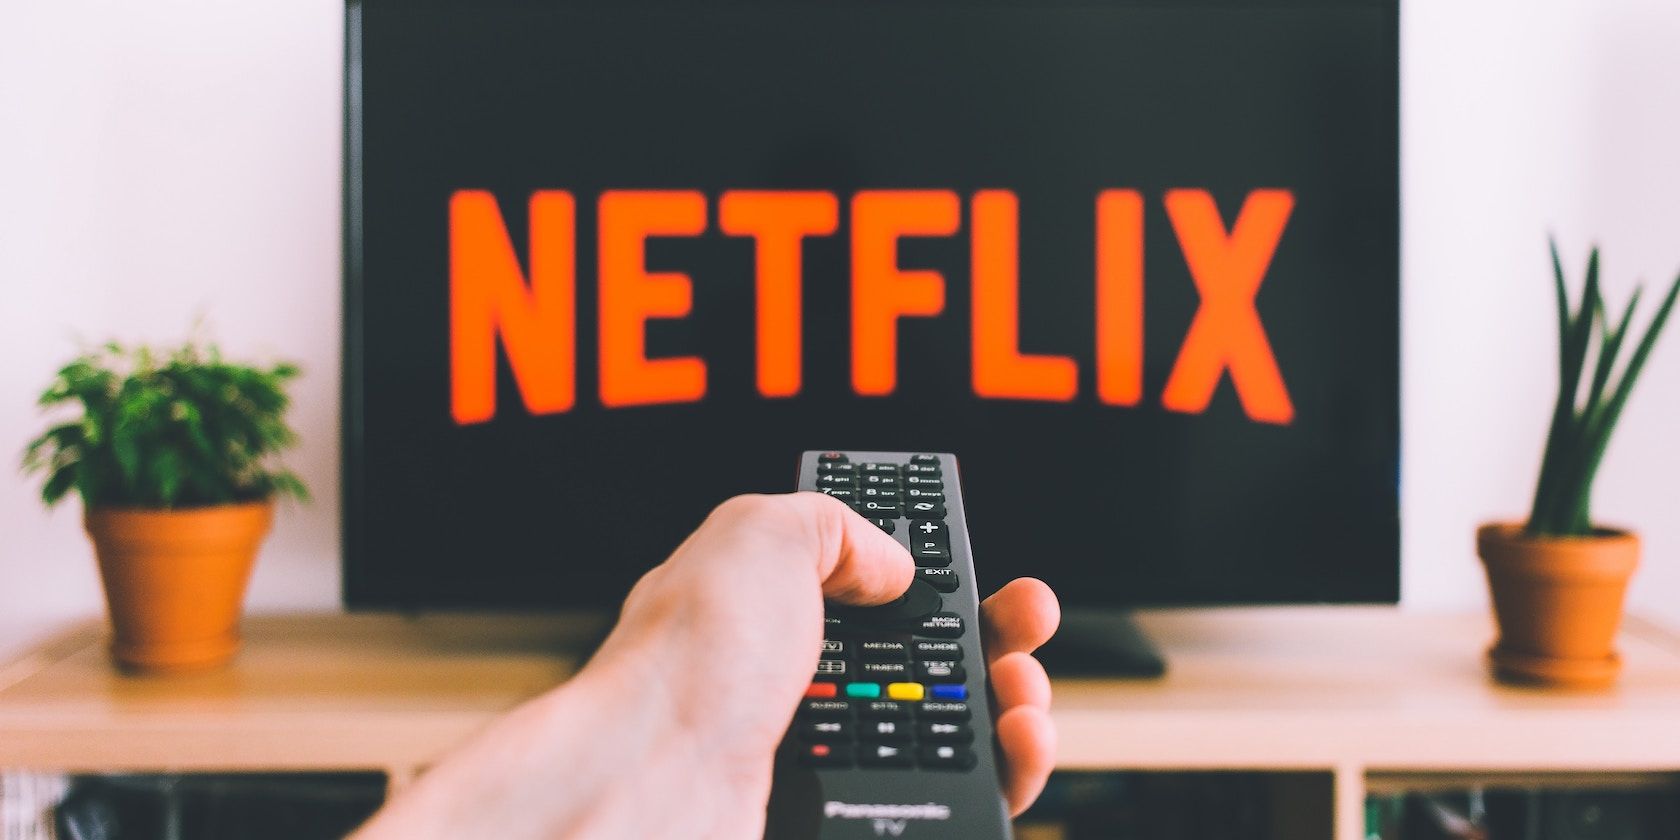 Hand pointing remote at Netflix on TV